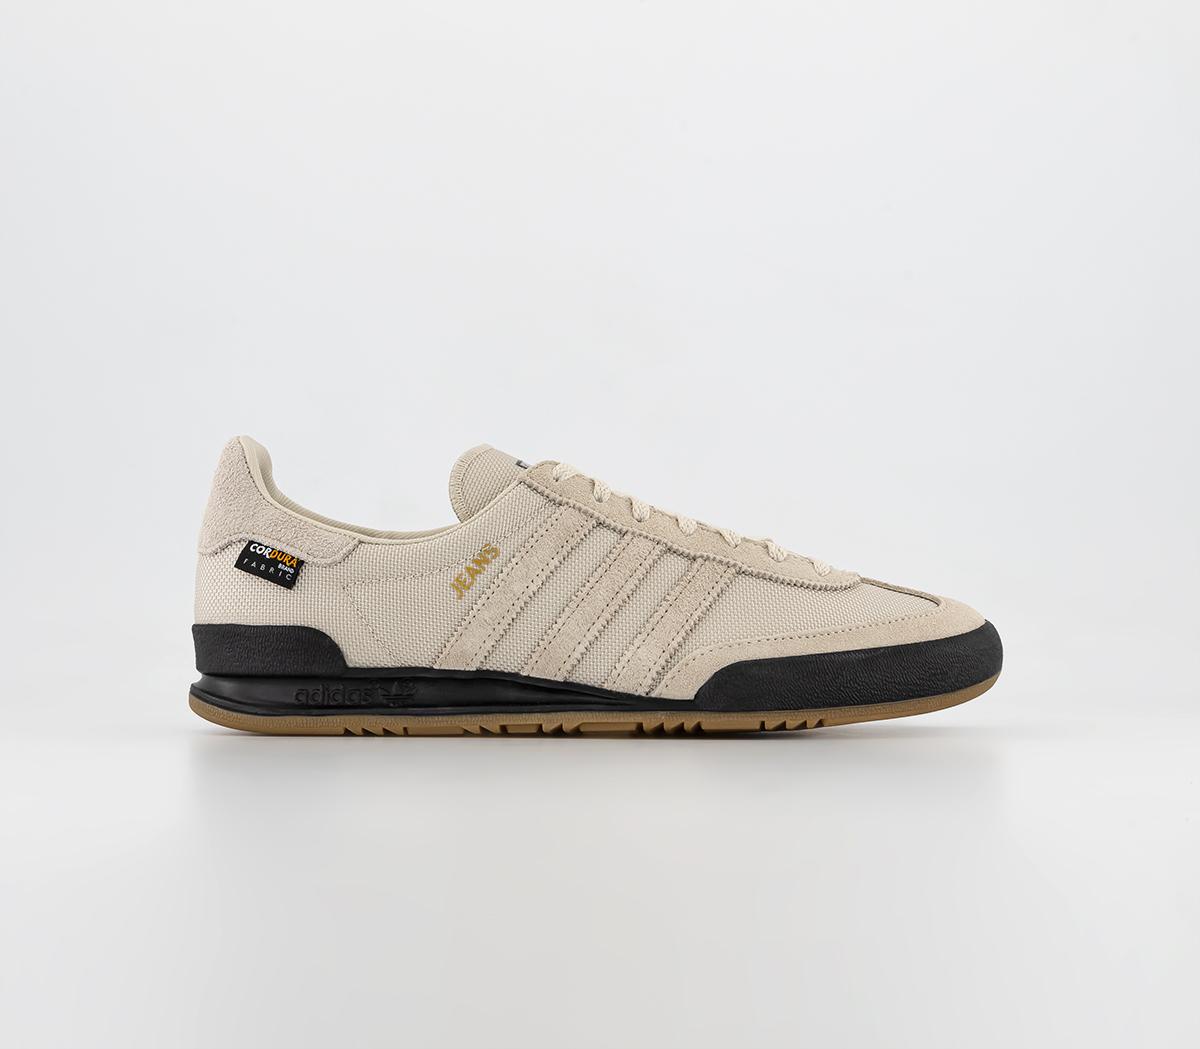 ADIDAS ORIGINALS JEANS Men's Trainers in Brown and Yellow Limited Stock  £105.00 - PicClick UK